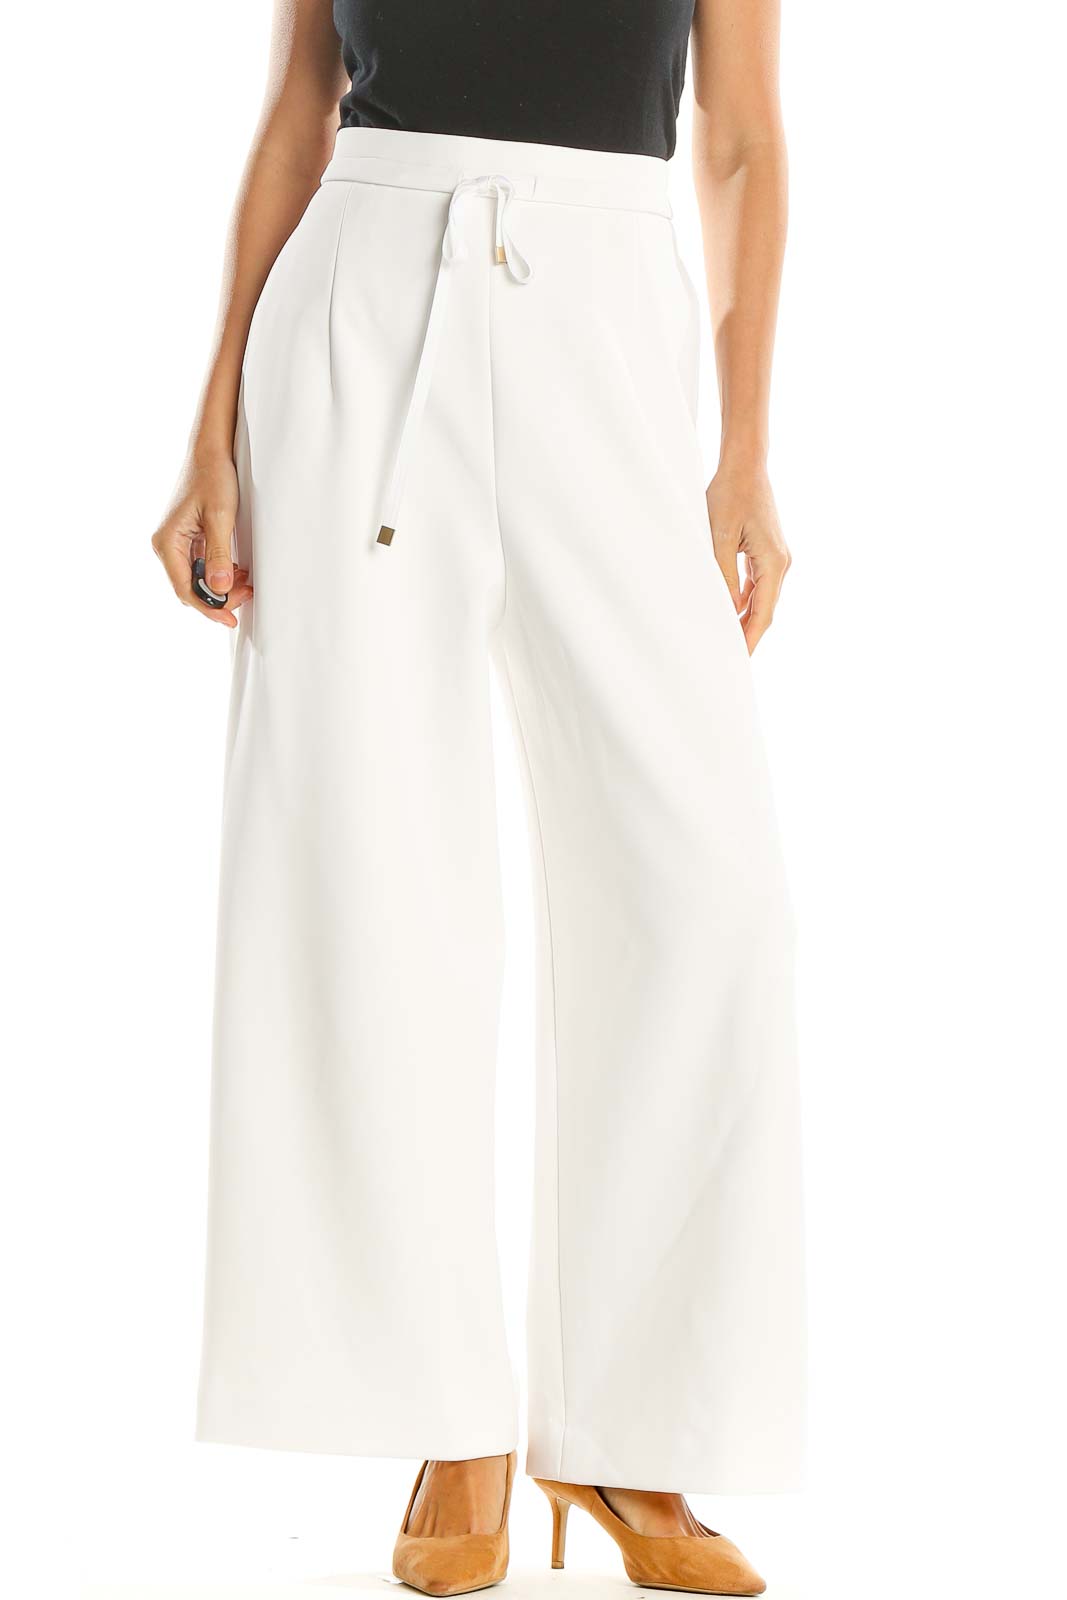 White Chic Wide Leg High Waisted Pants Front